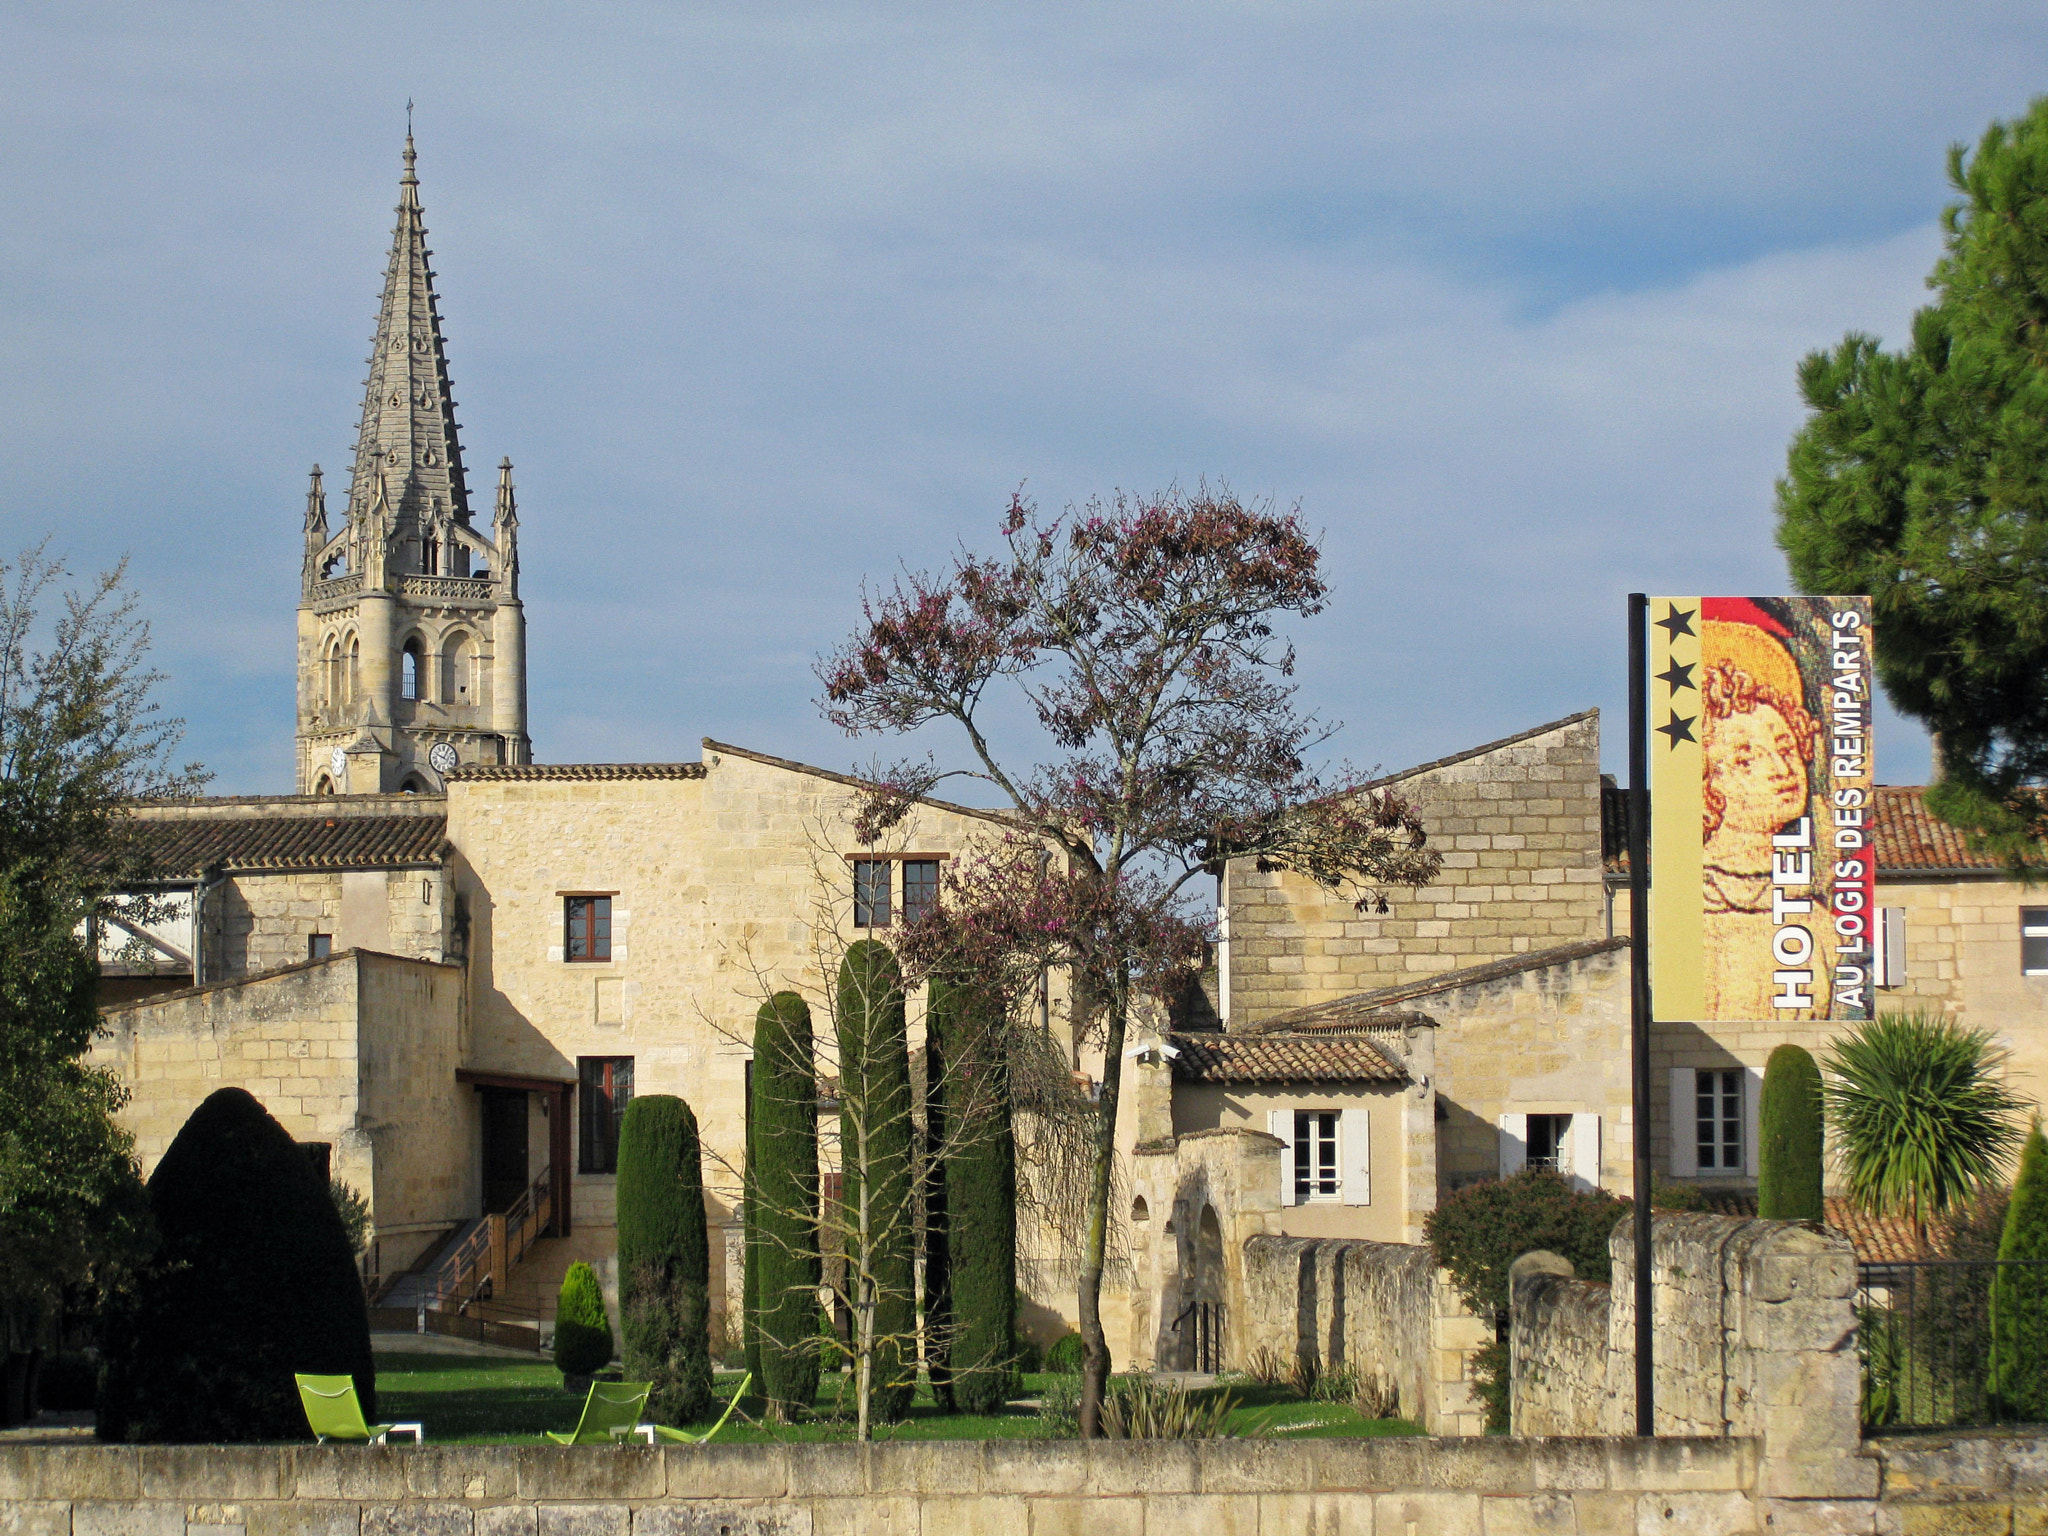 Canon PowerShot SD890 IS (Digital IXUS 970 IS / IXY Digital 820 IS) sample photo. Saint-emilion in france photography